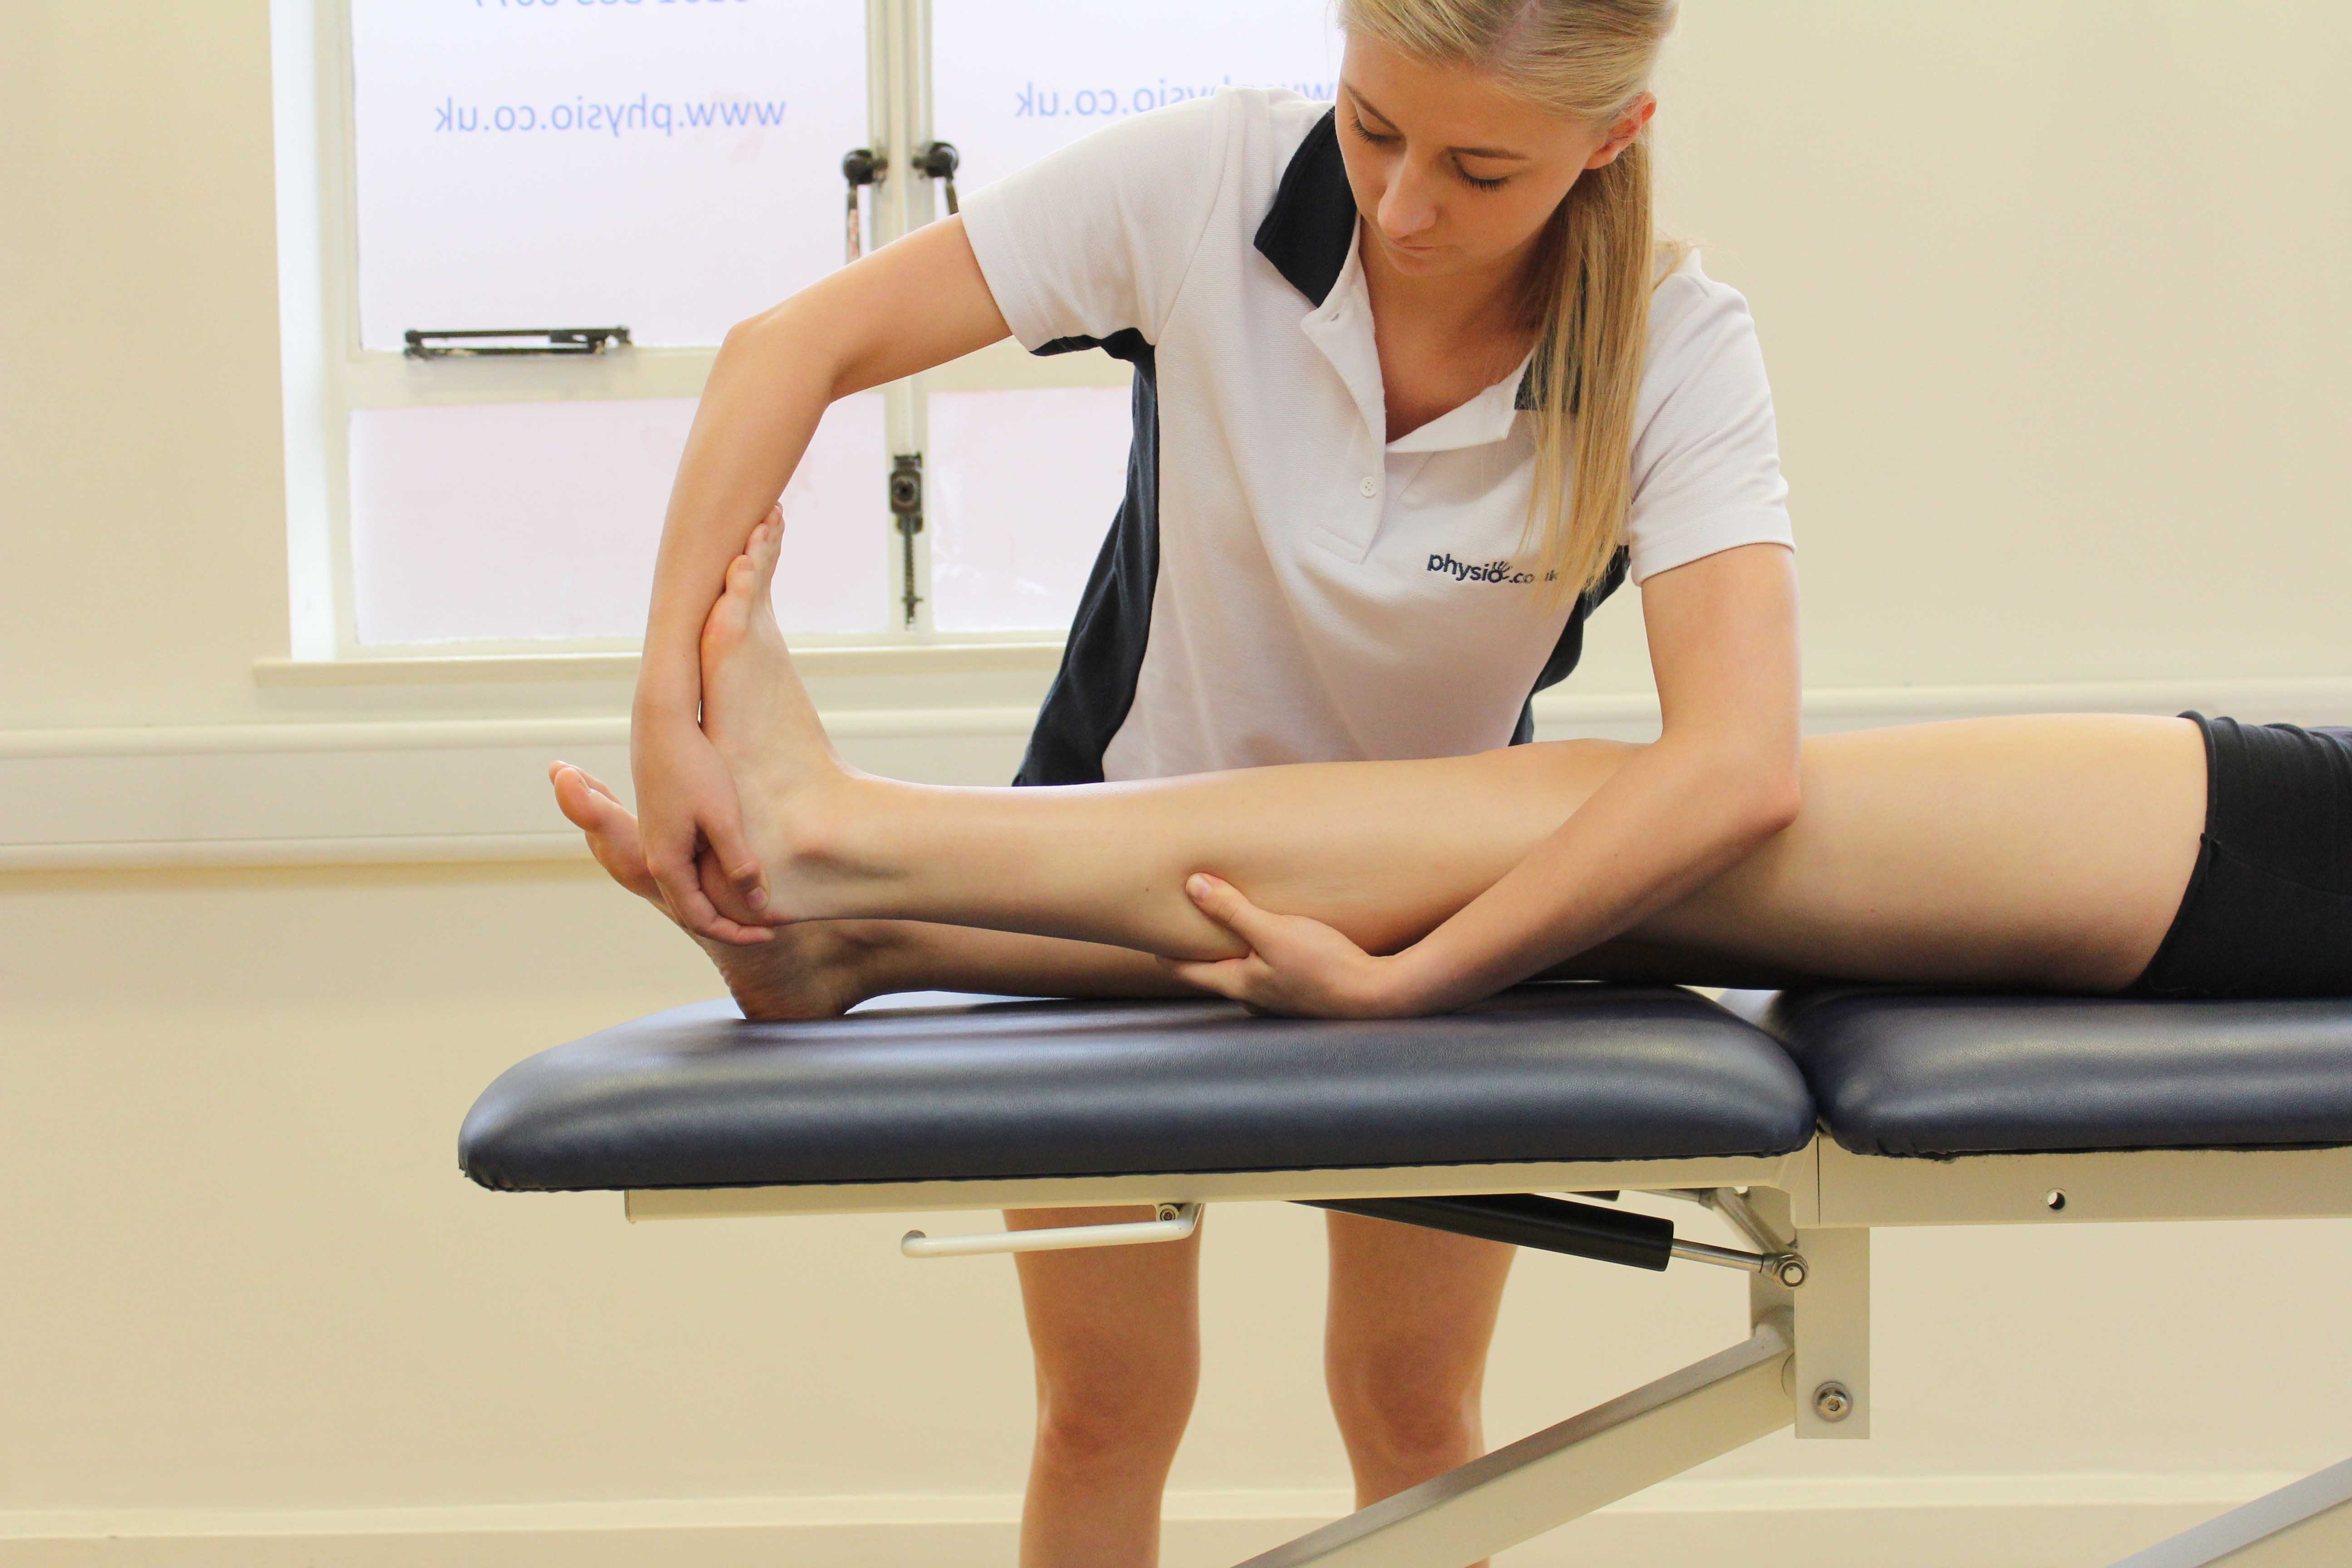 beating percussion massage applied to the hamstrings by specialist therapist